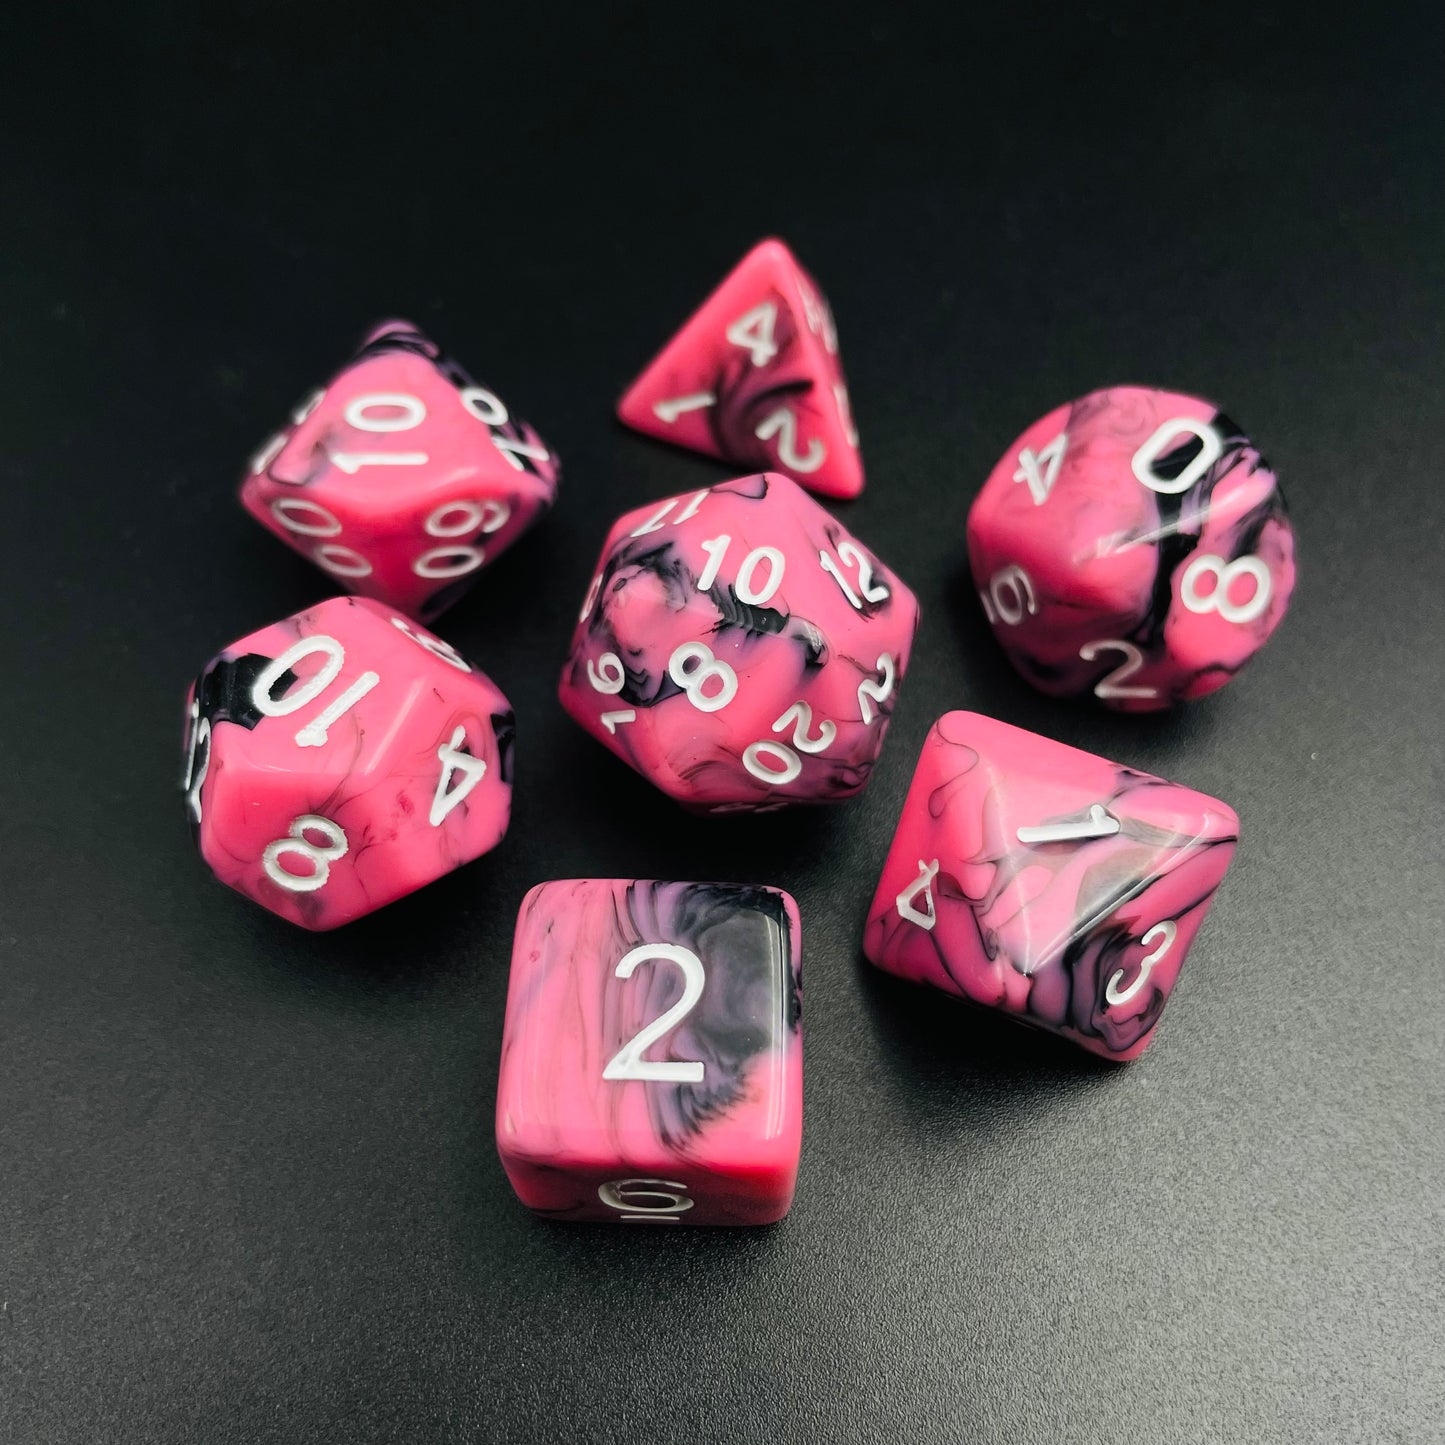 FREE Today: Pink Lady Dice Set